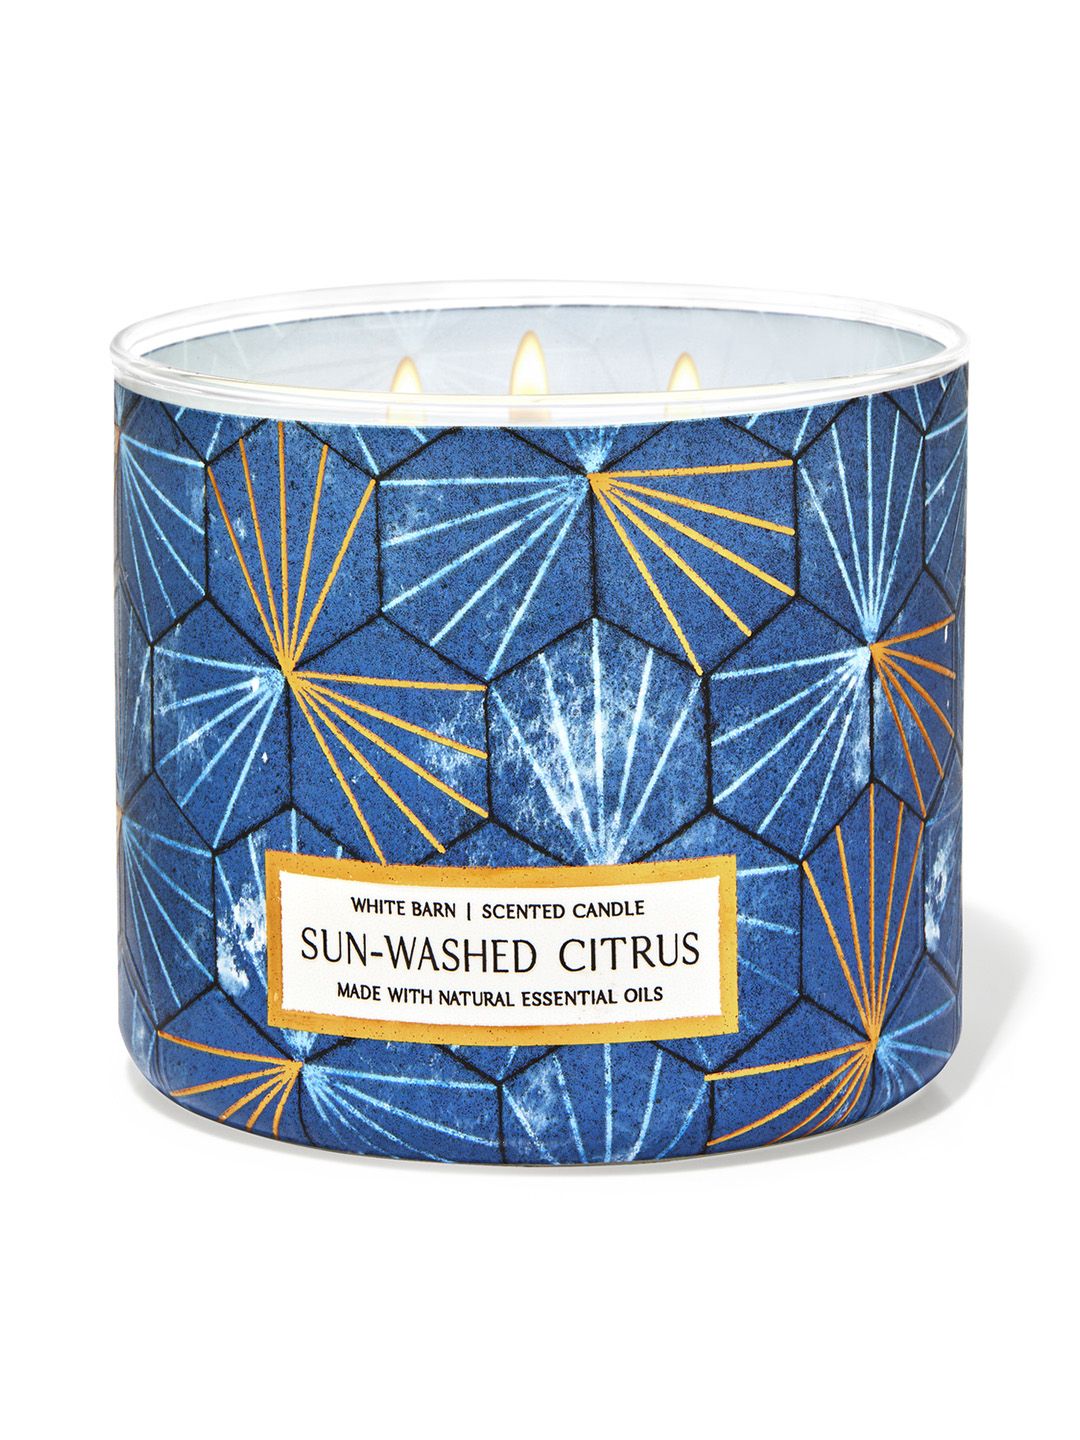 Bath & Body Works Sun-Washed Citrus 3-Wick Candle - 411 g Price in India